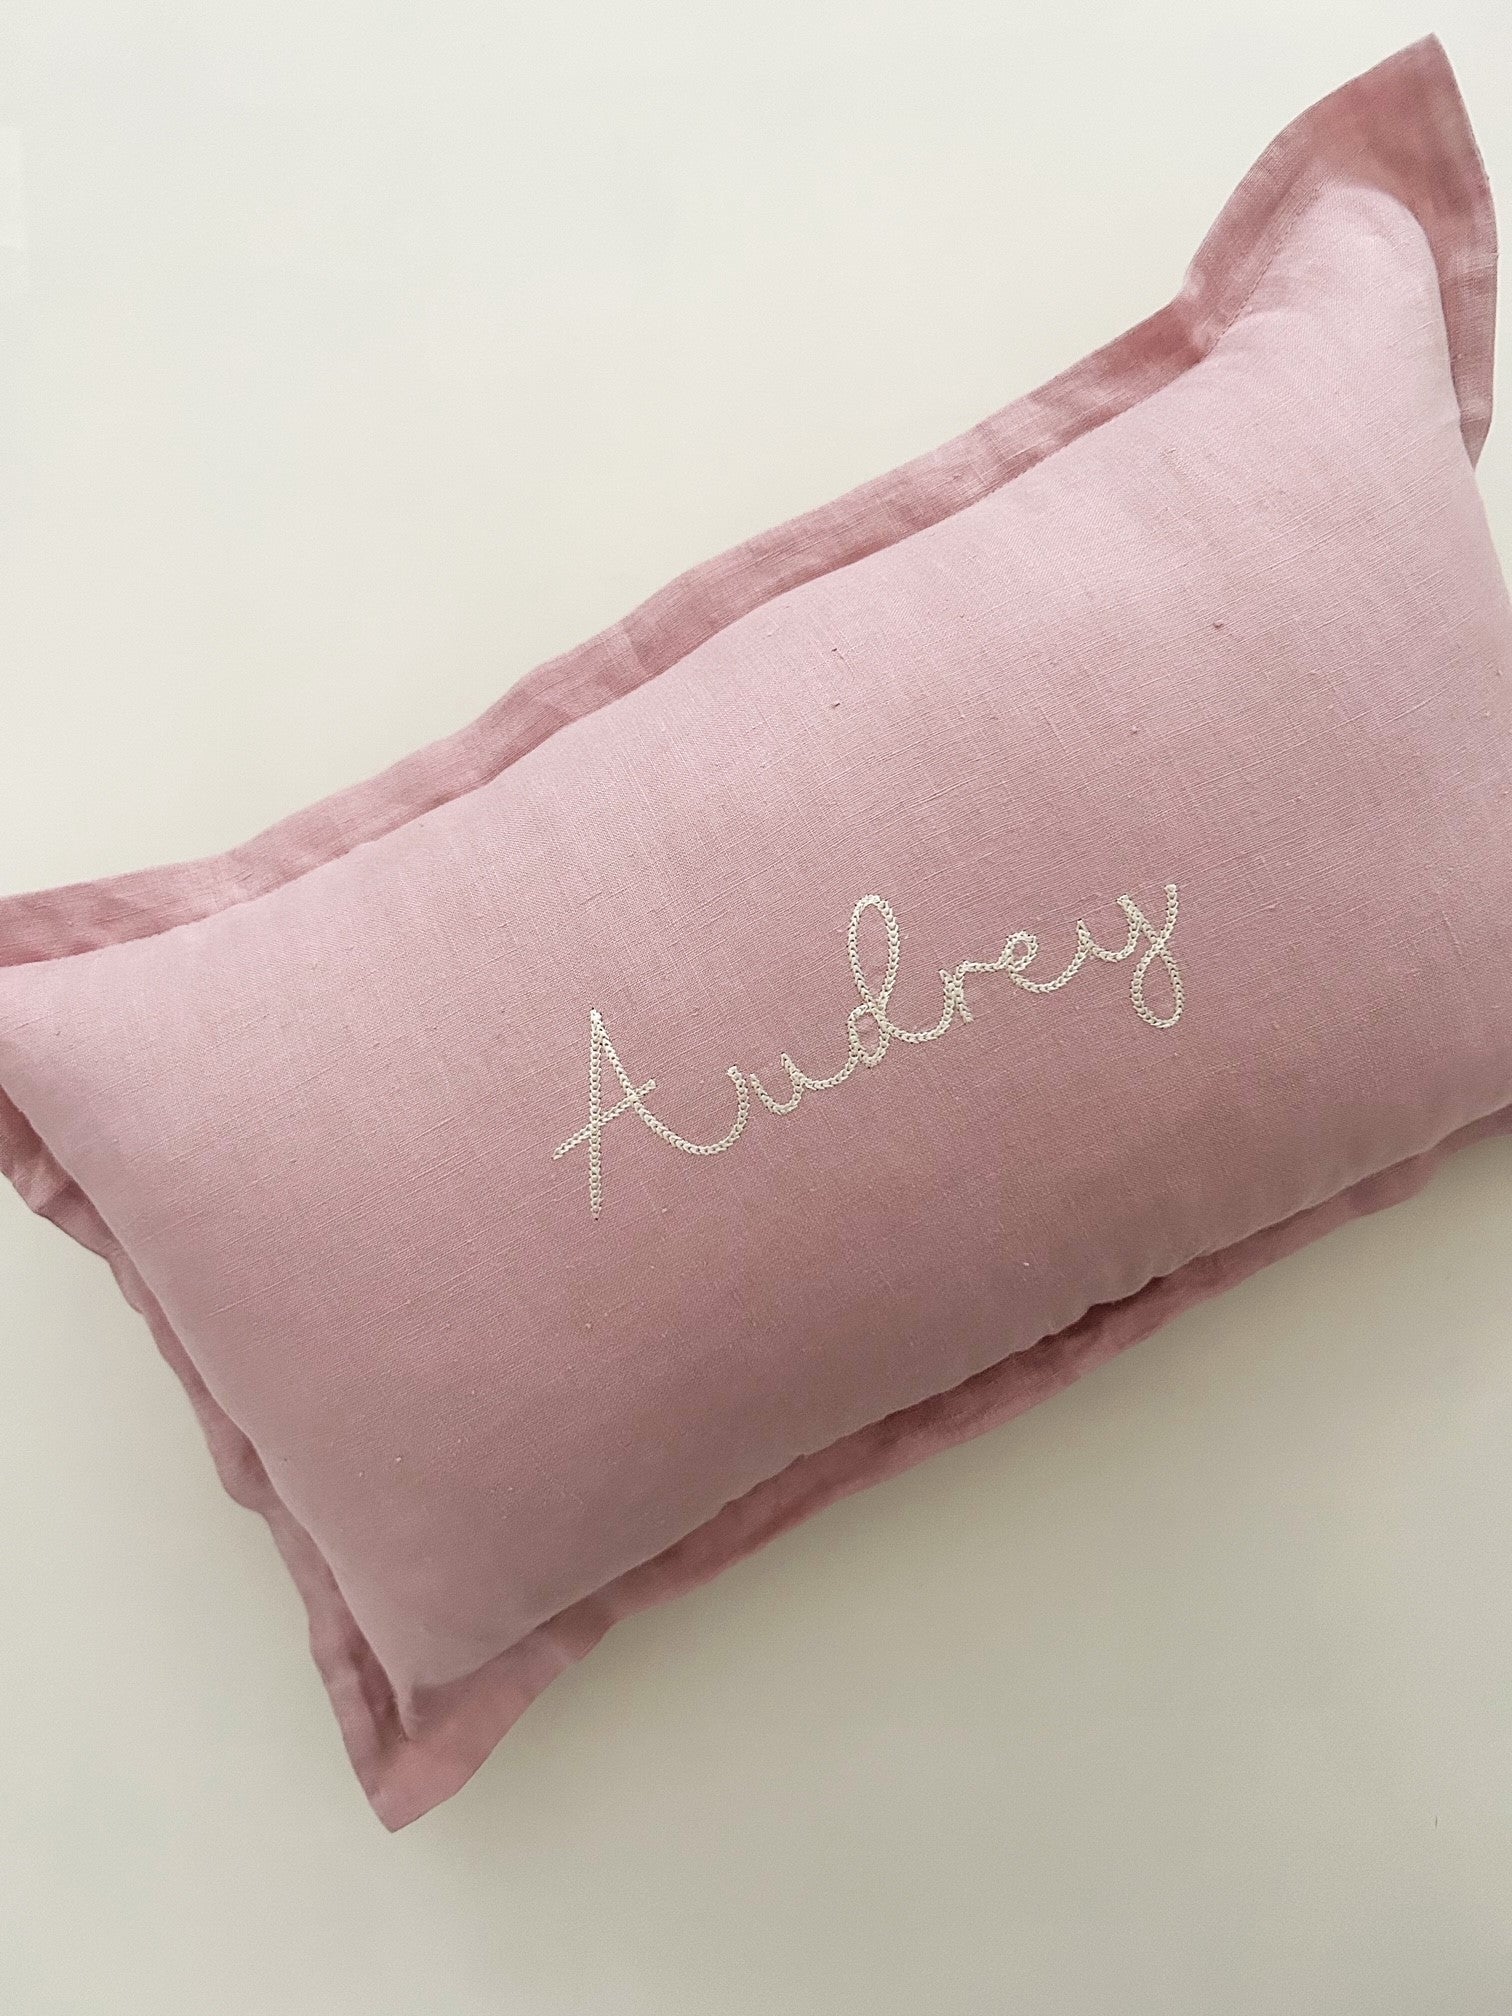 PERSONALISED LINEN CUSHION | PINK MAUVE